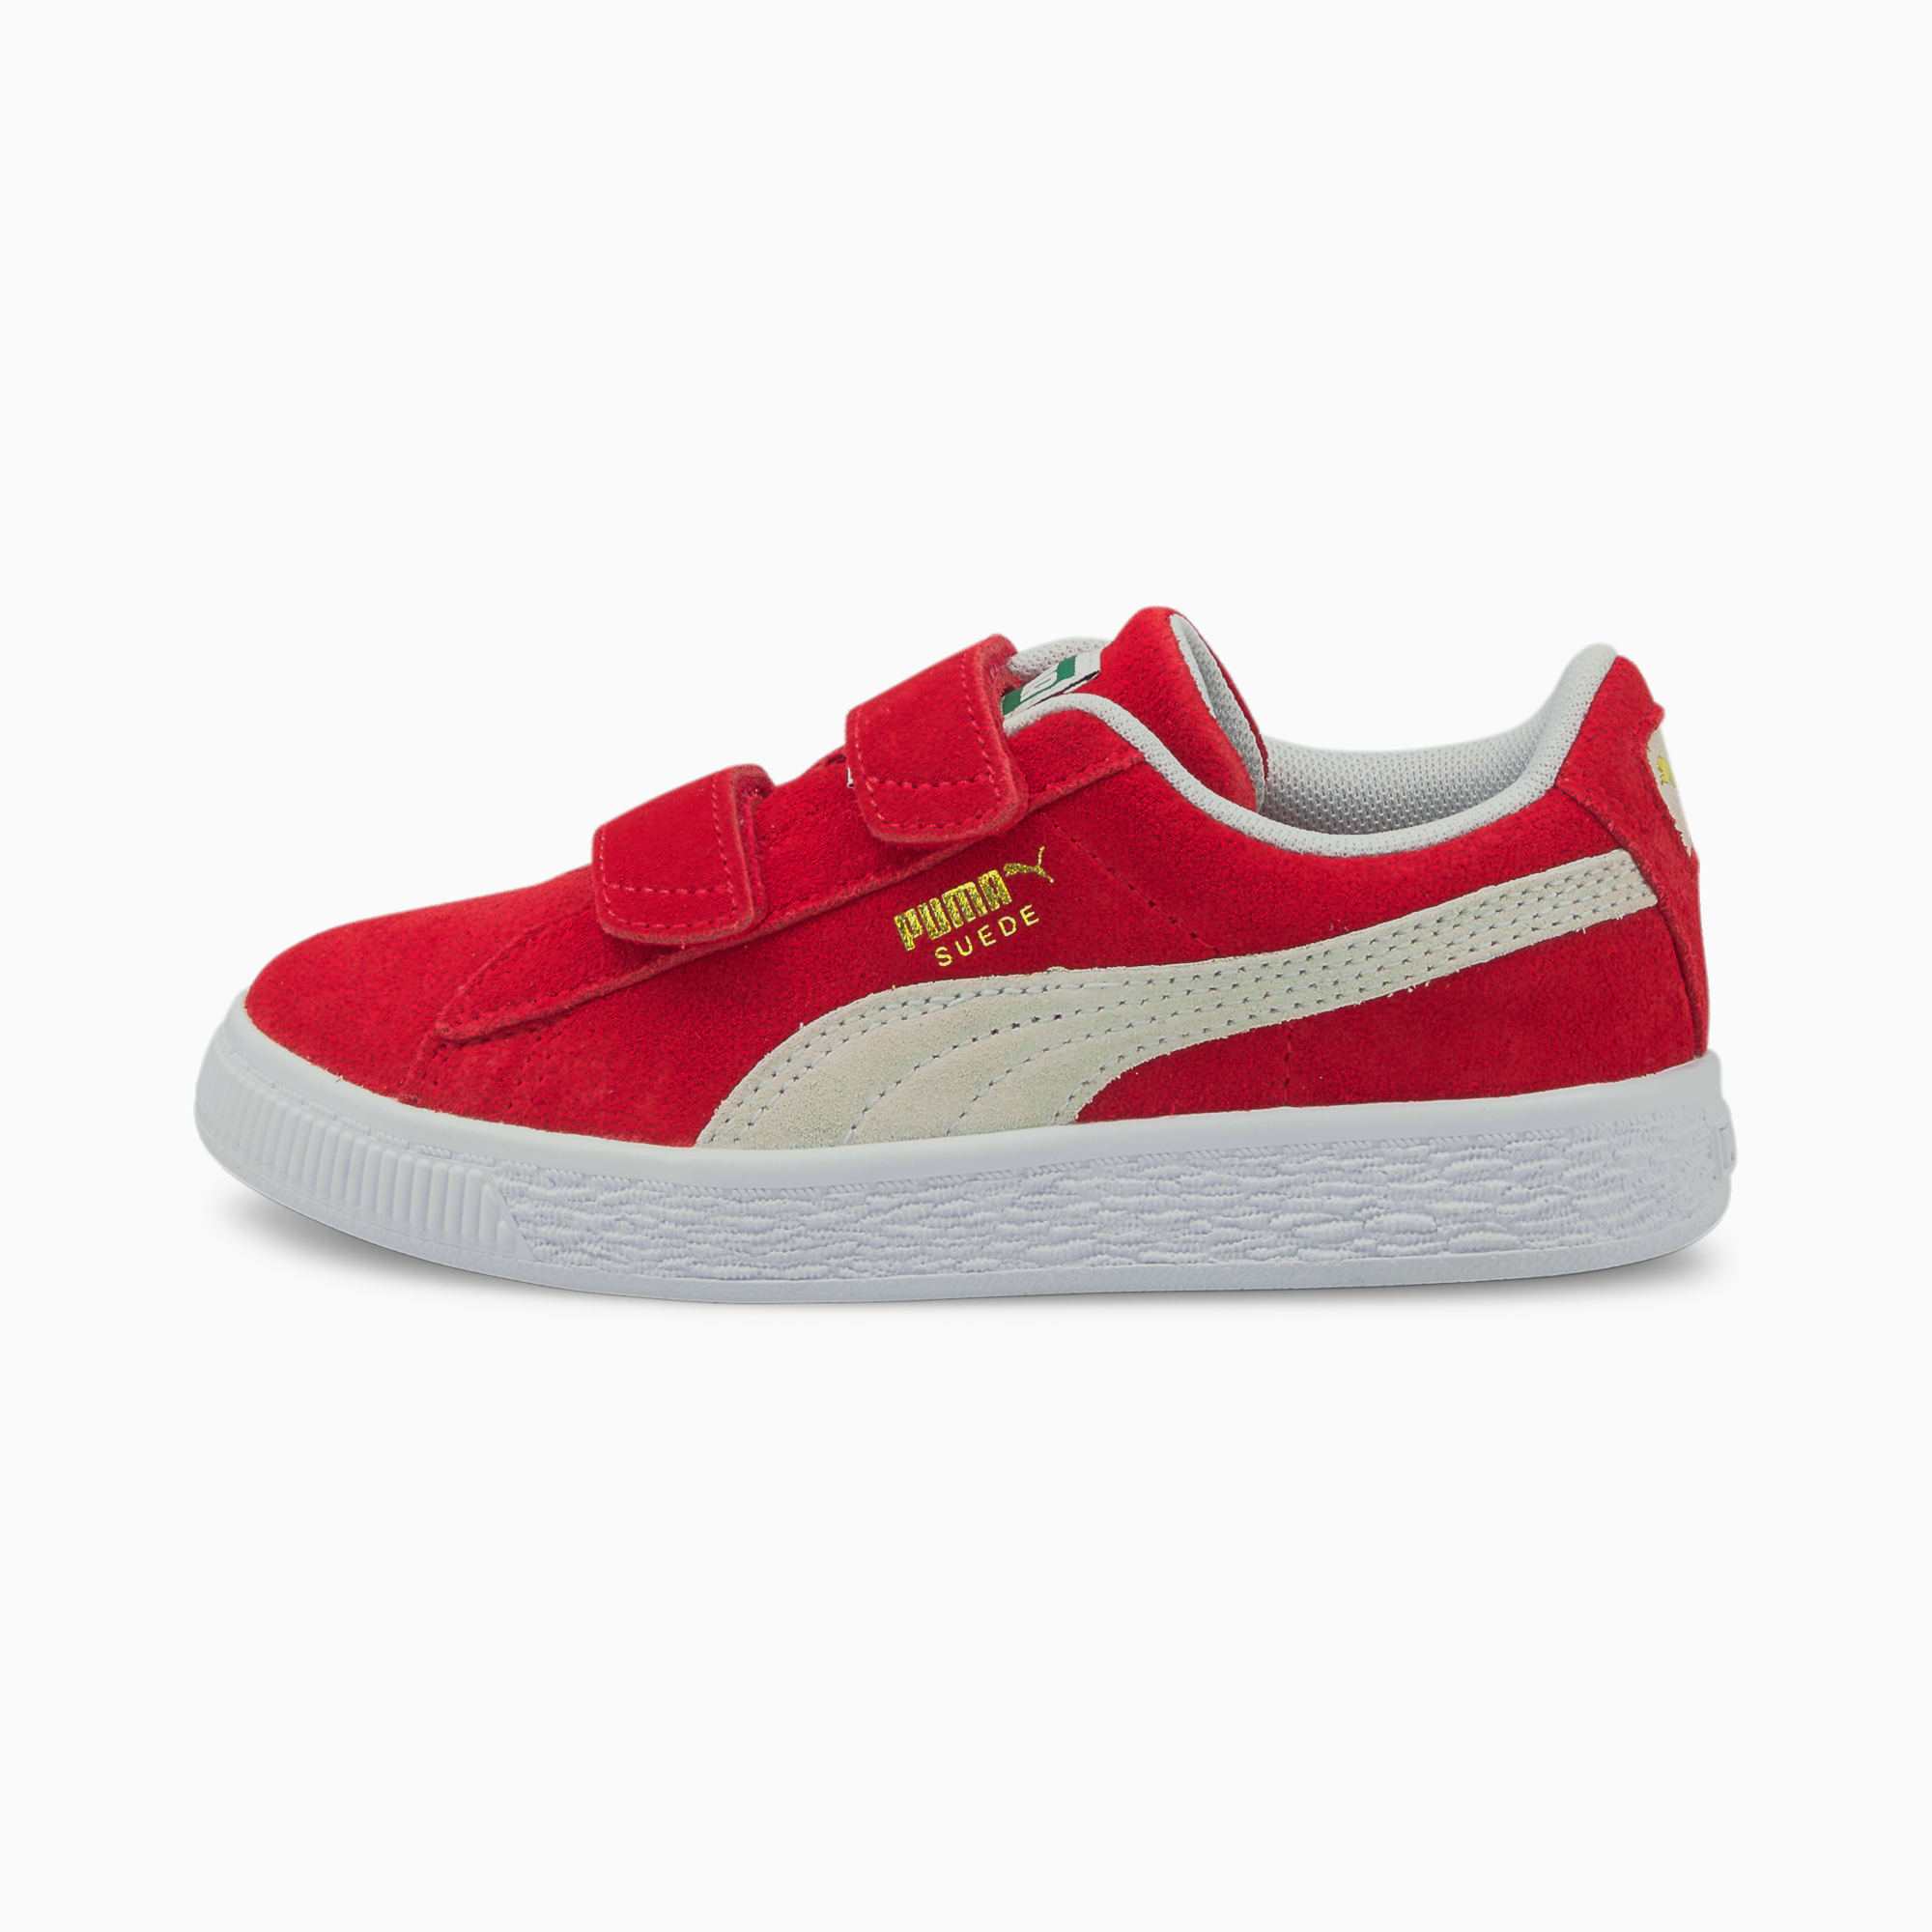 PUMA Chaussure Baskets Suede Classic XXI enfant, Rouge/Blanc, Taille 34, Chaussures